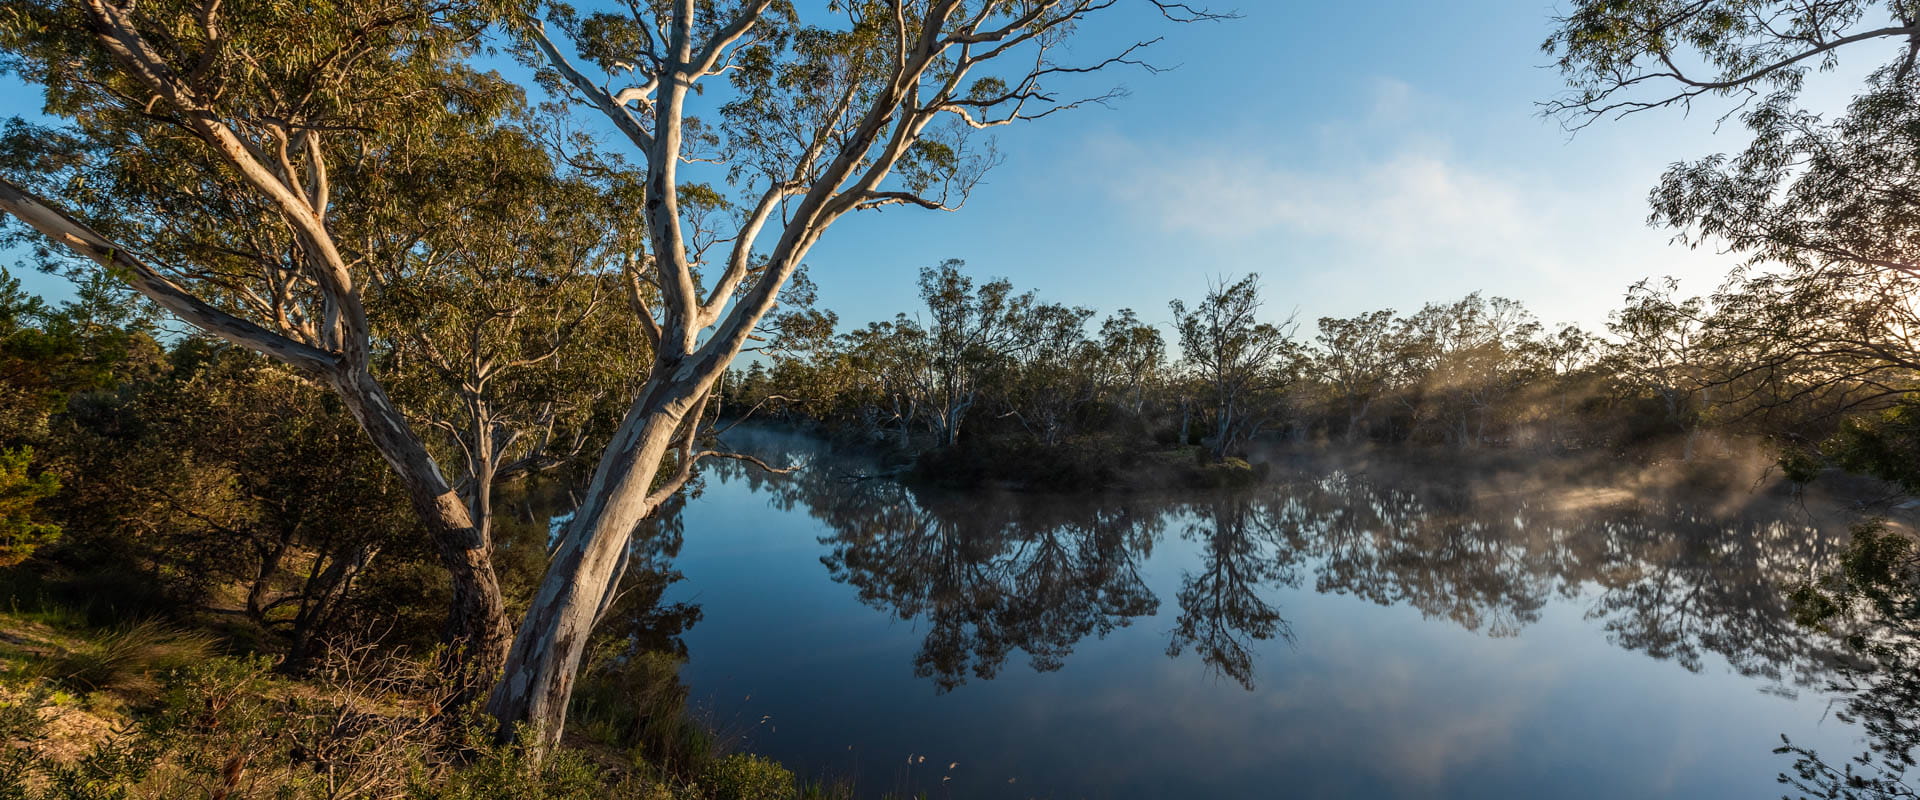 A winding river in a rugged bushland landscape. 